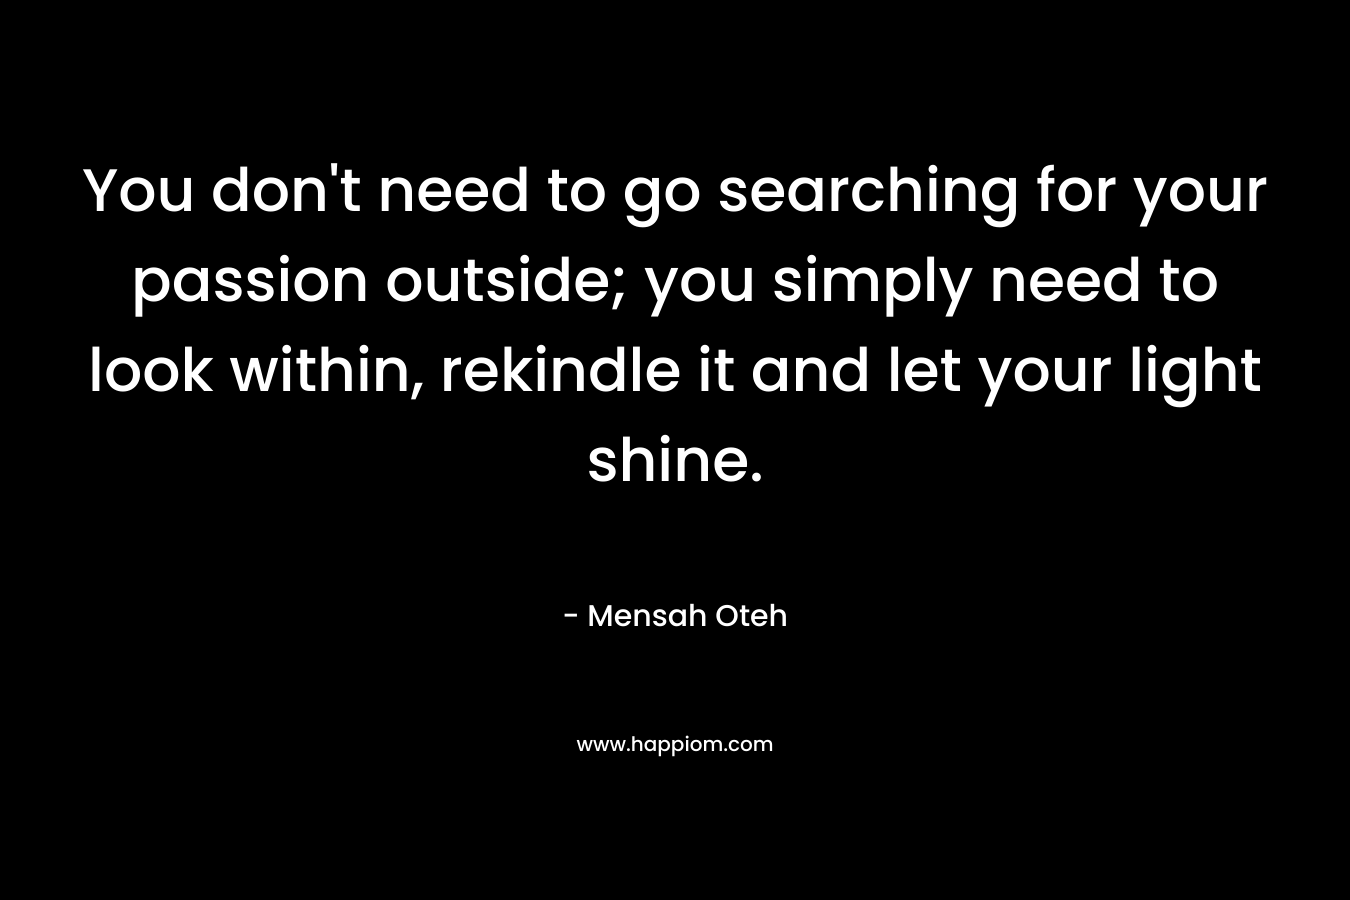 You don’t need to go searching for your passion outside; you simply need to look within, rekindle it and let your light shine. – Mensah Oteh